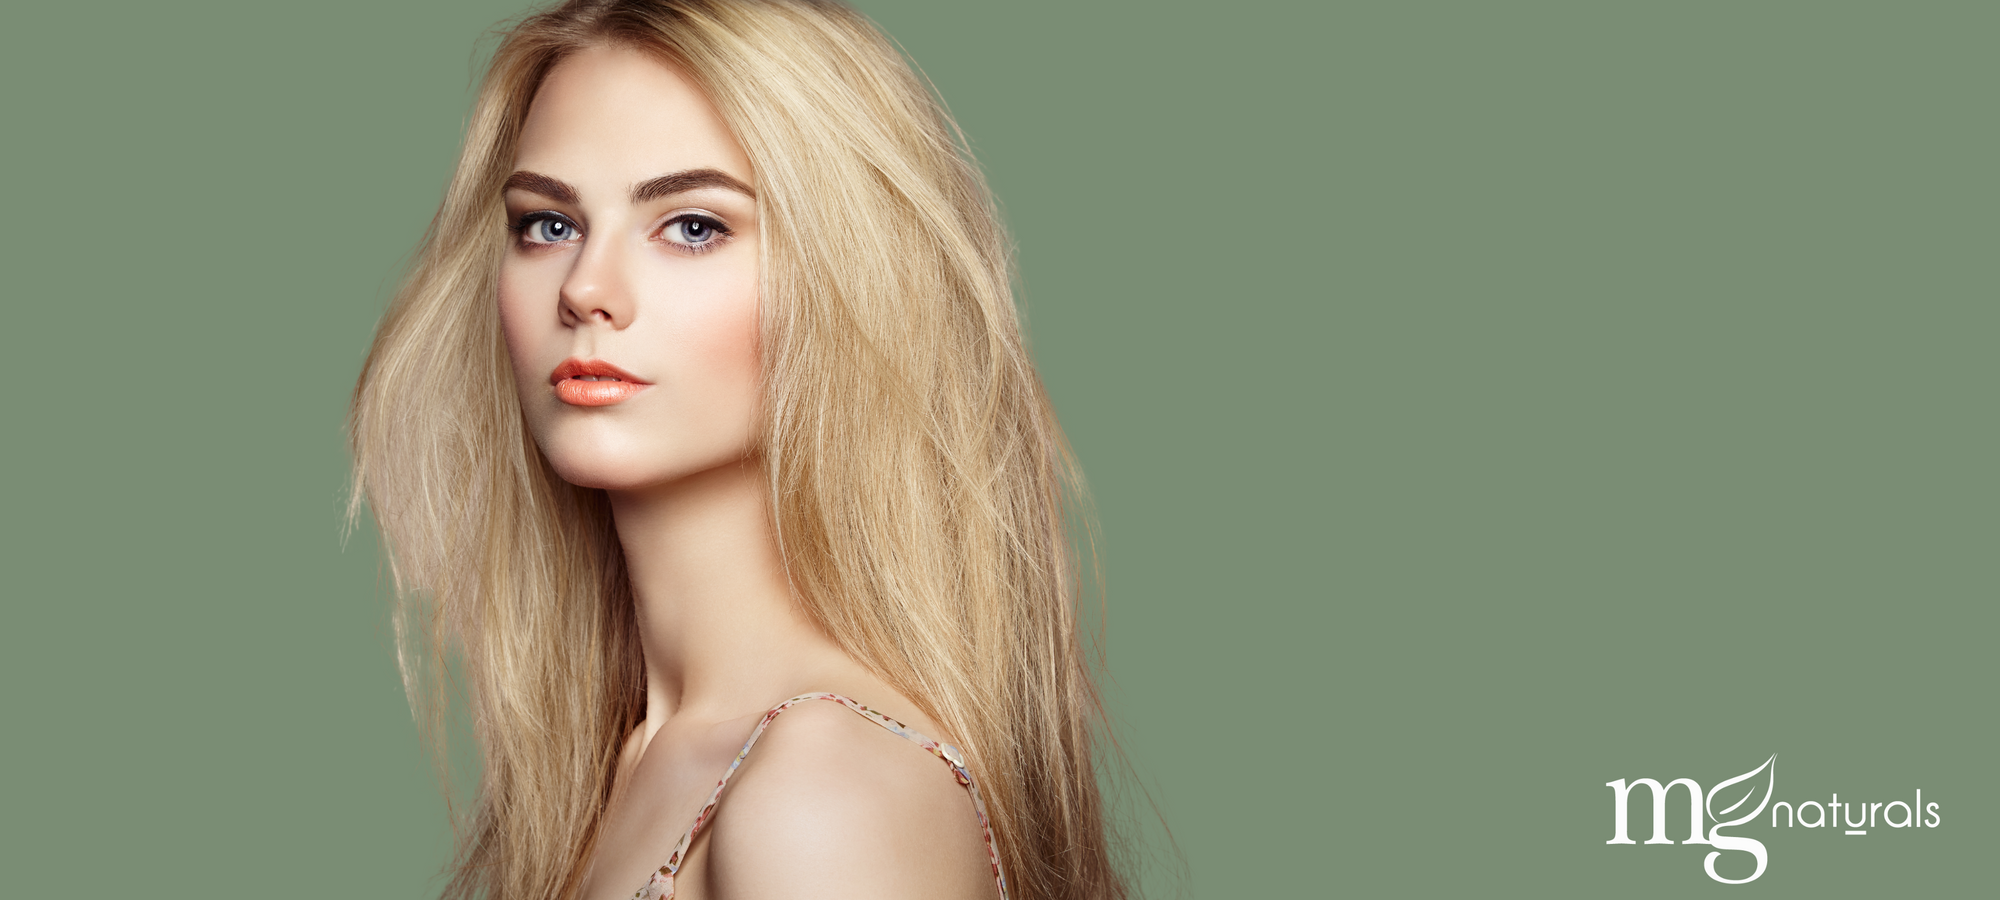 Elevate Your Beauty: Makeup Shades for Blonde Women